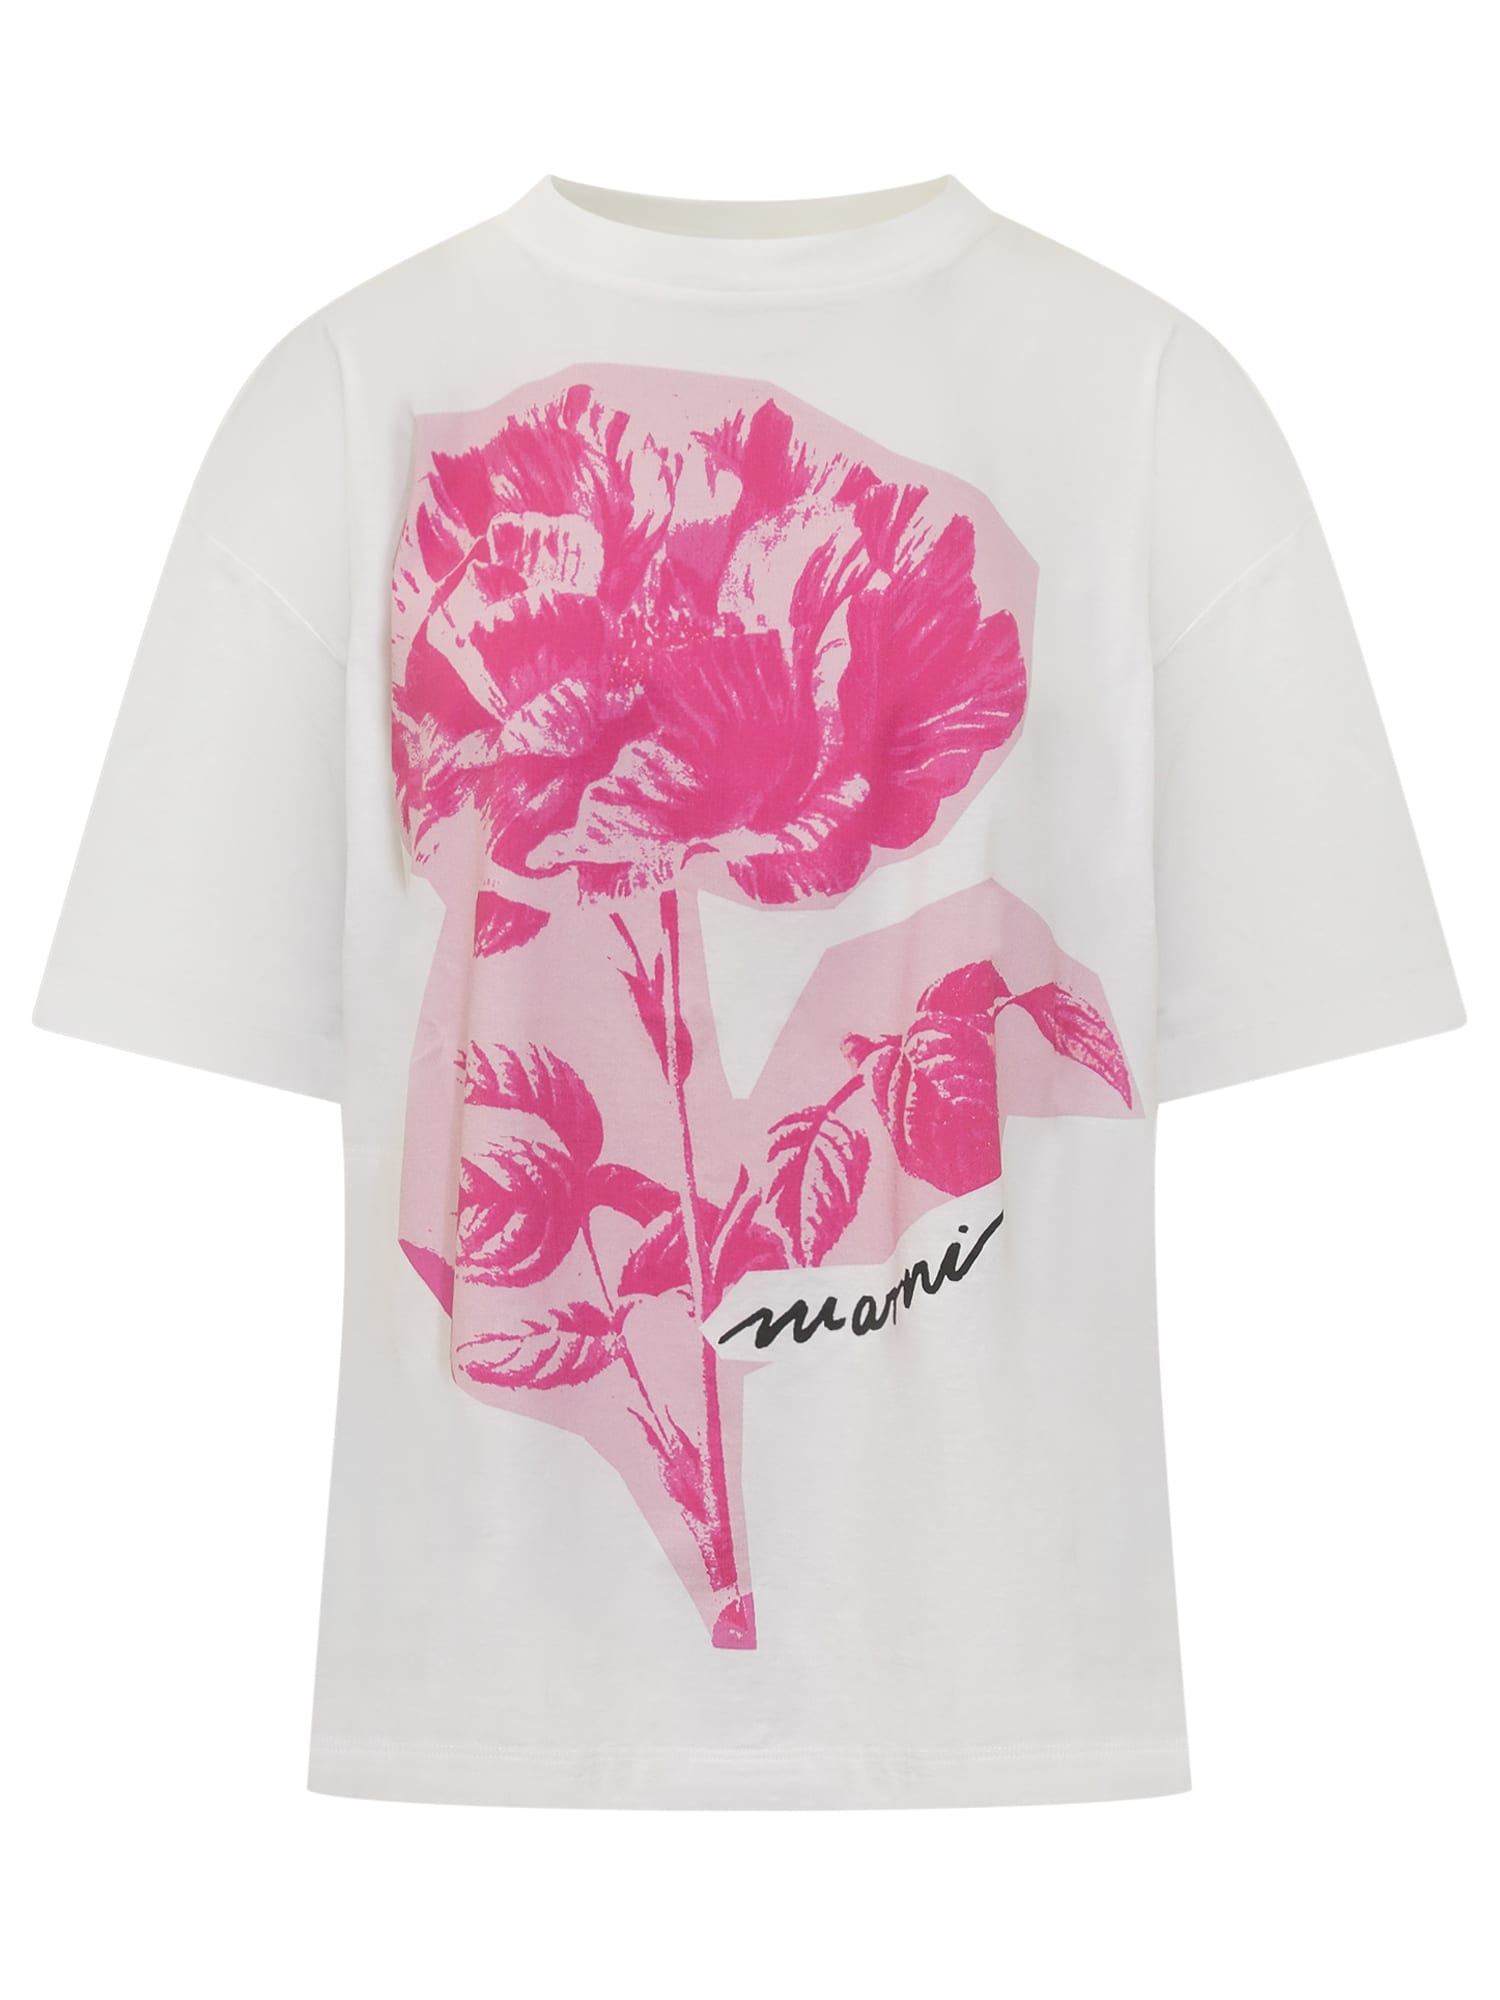 MARNI T-SHIRT WITH FLORAL PRINT